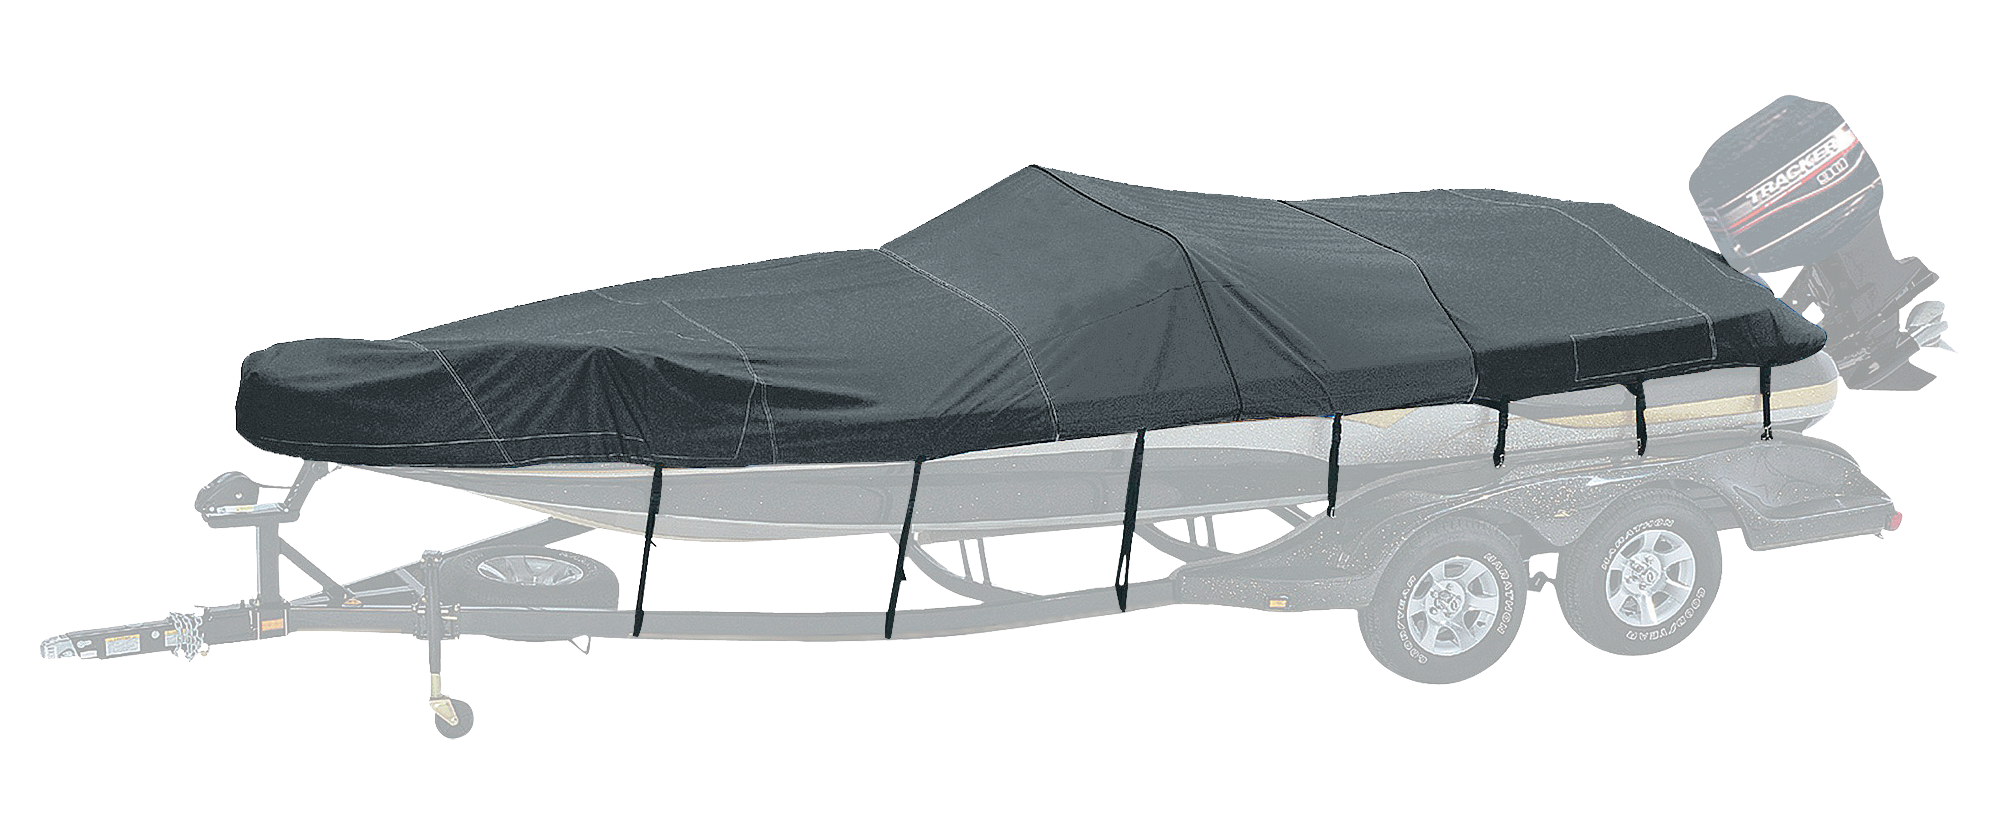 Bass Pro Shops Exact Fit Boat Cover by Westland - Tahoe Boats - 2005 228 Deckboat I/O - Charcoal